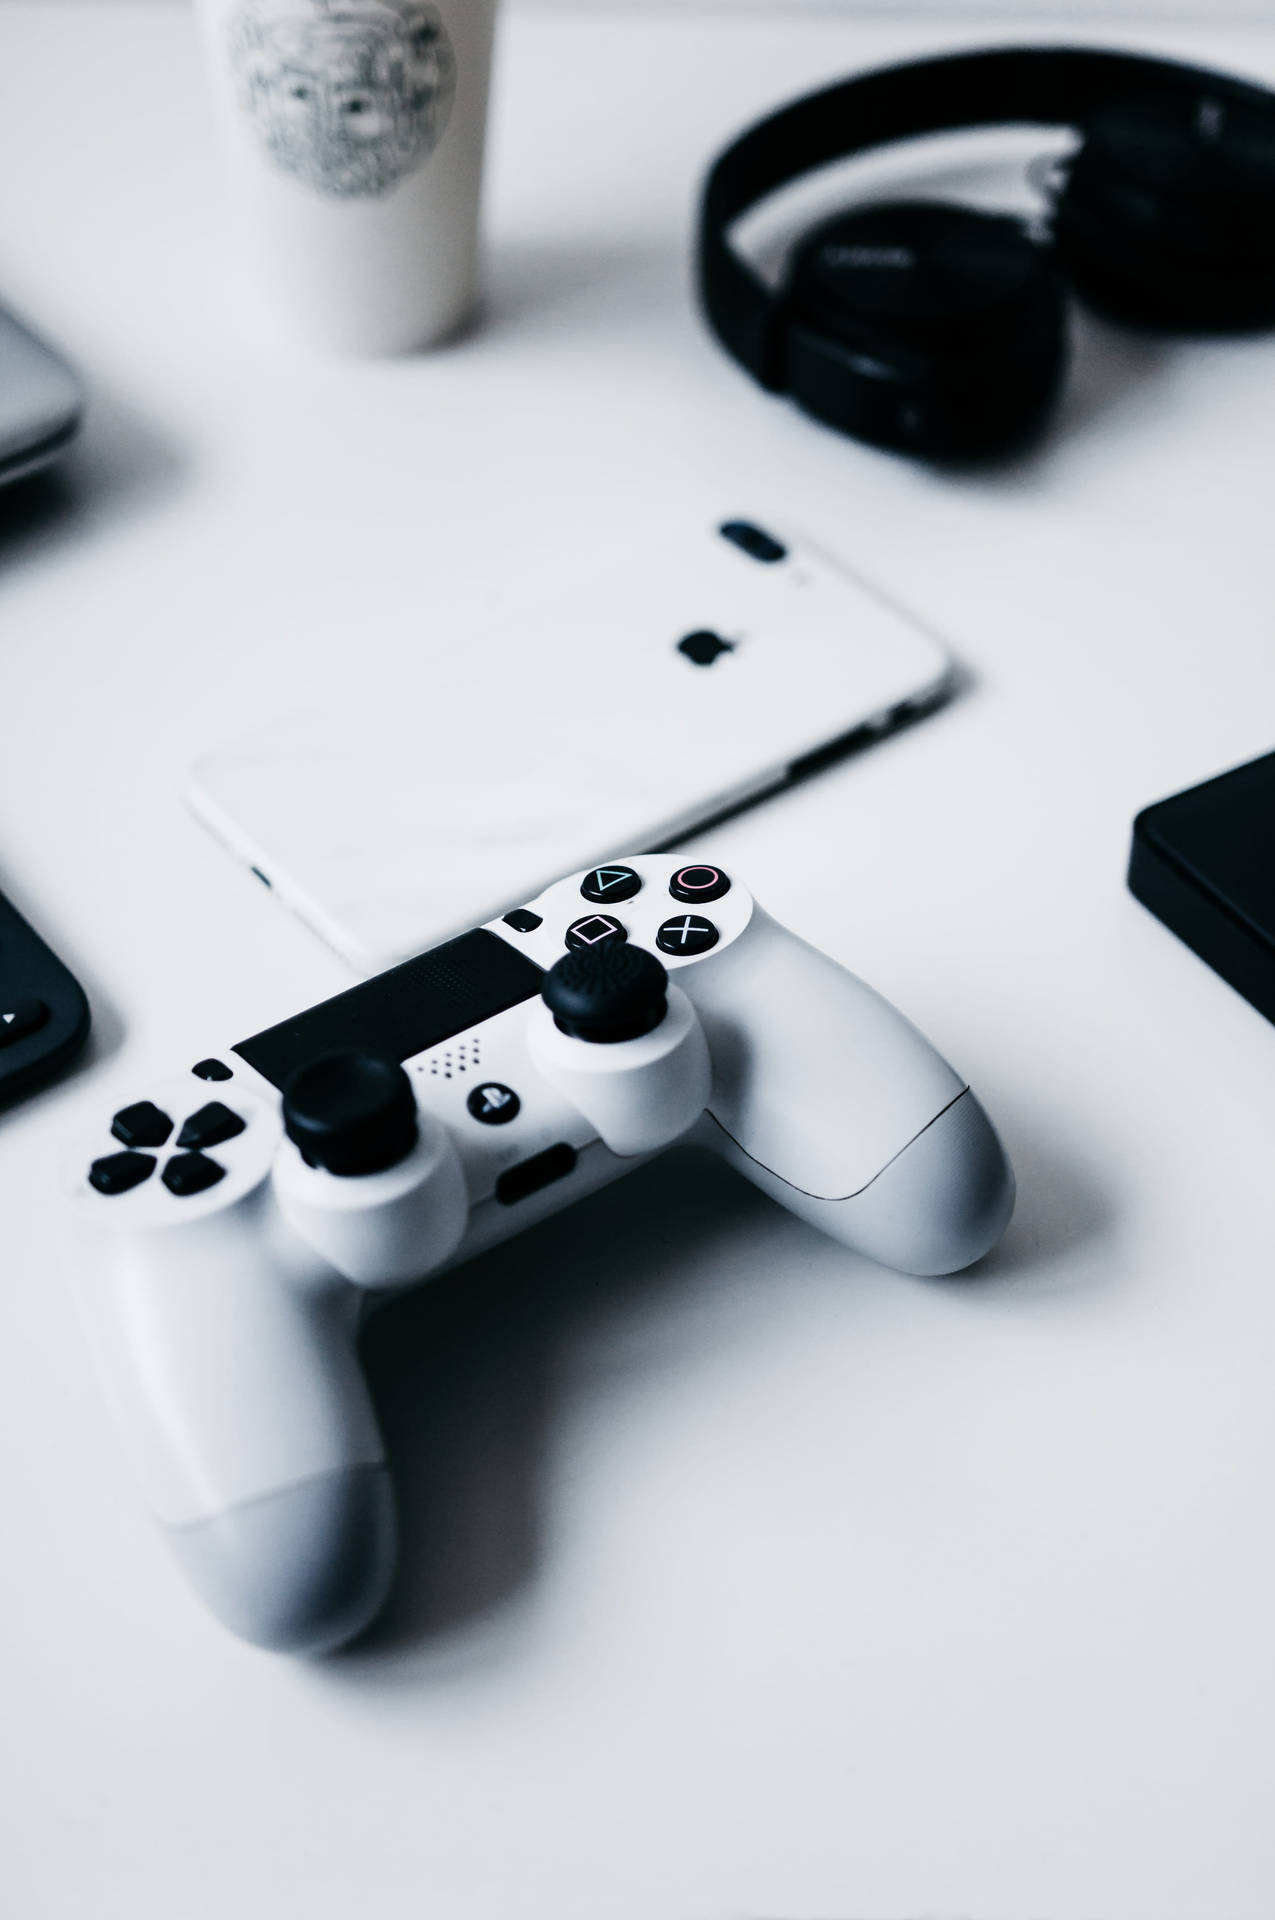 Iphone Desk With Playstation Controller Wallpaper